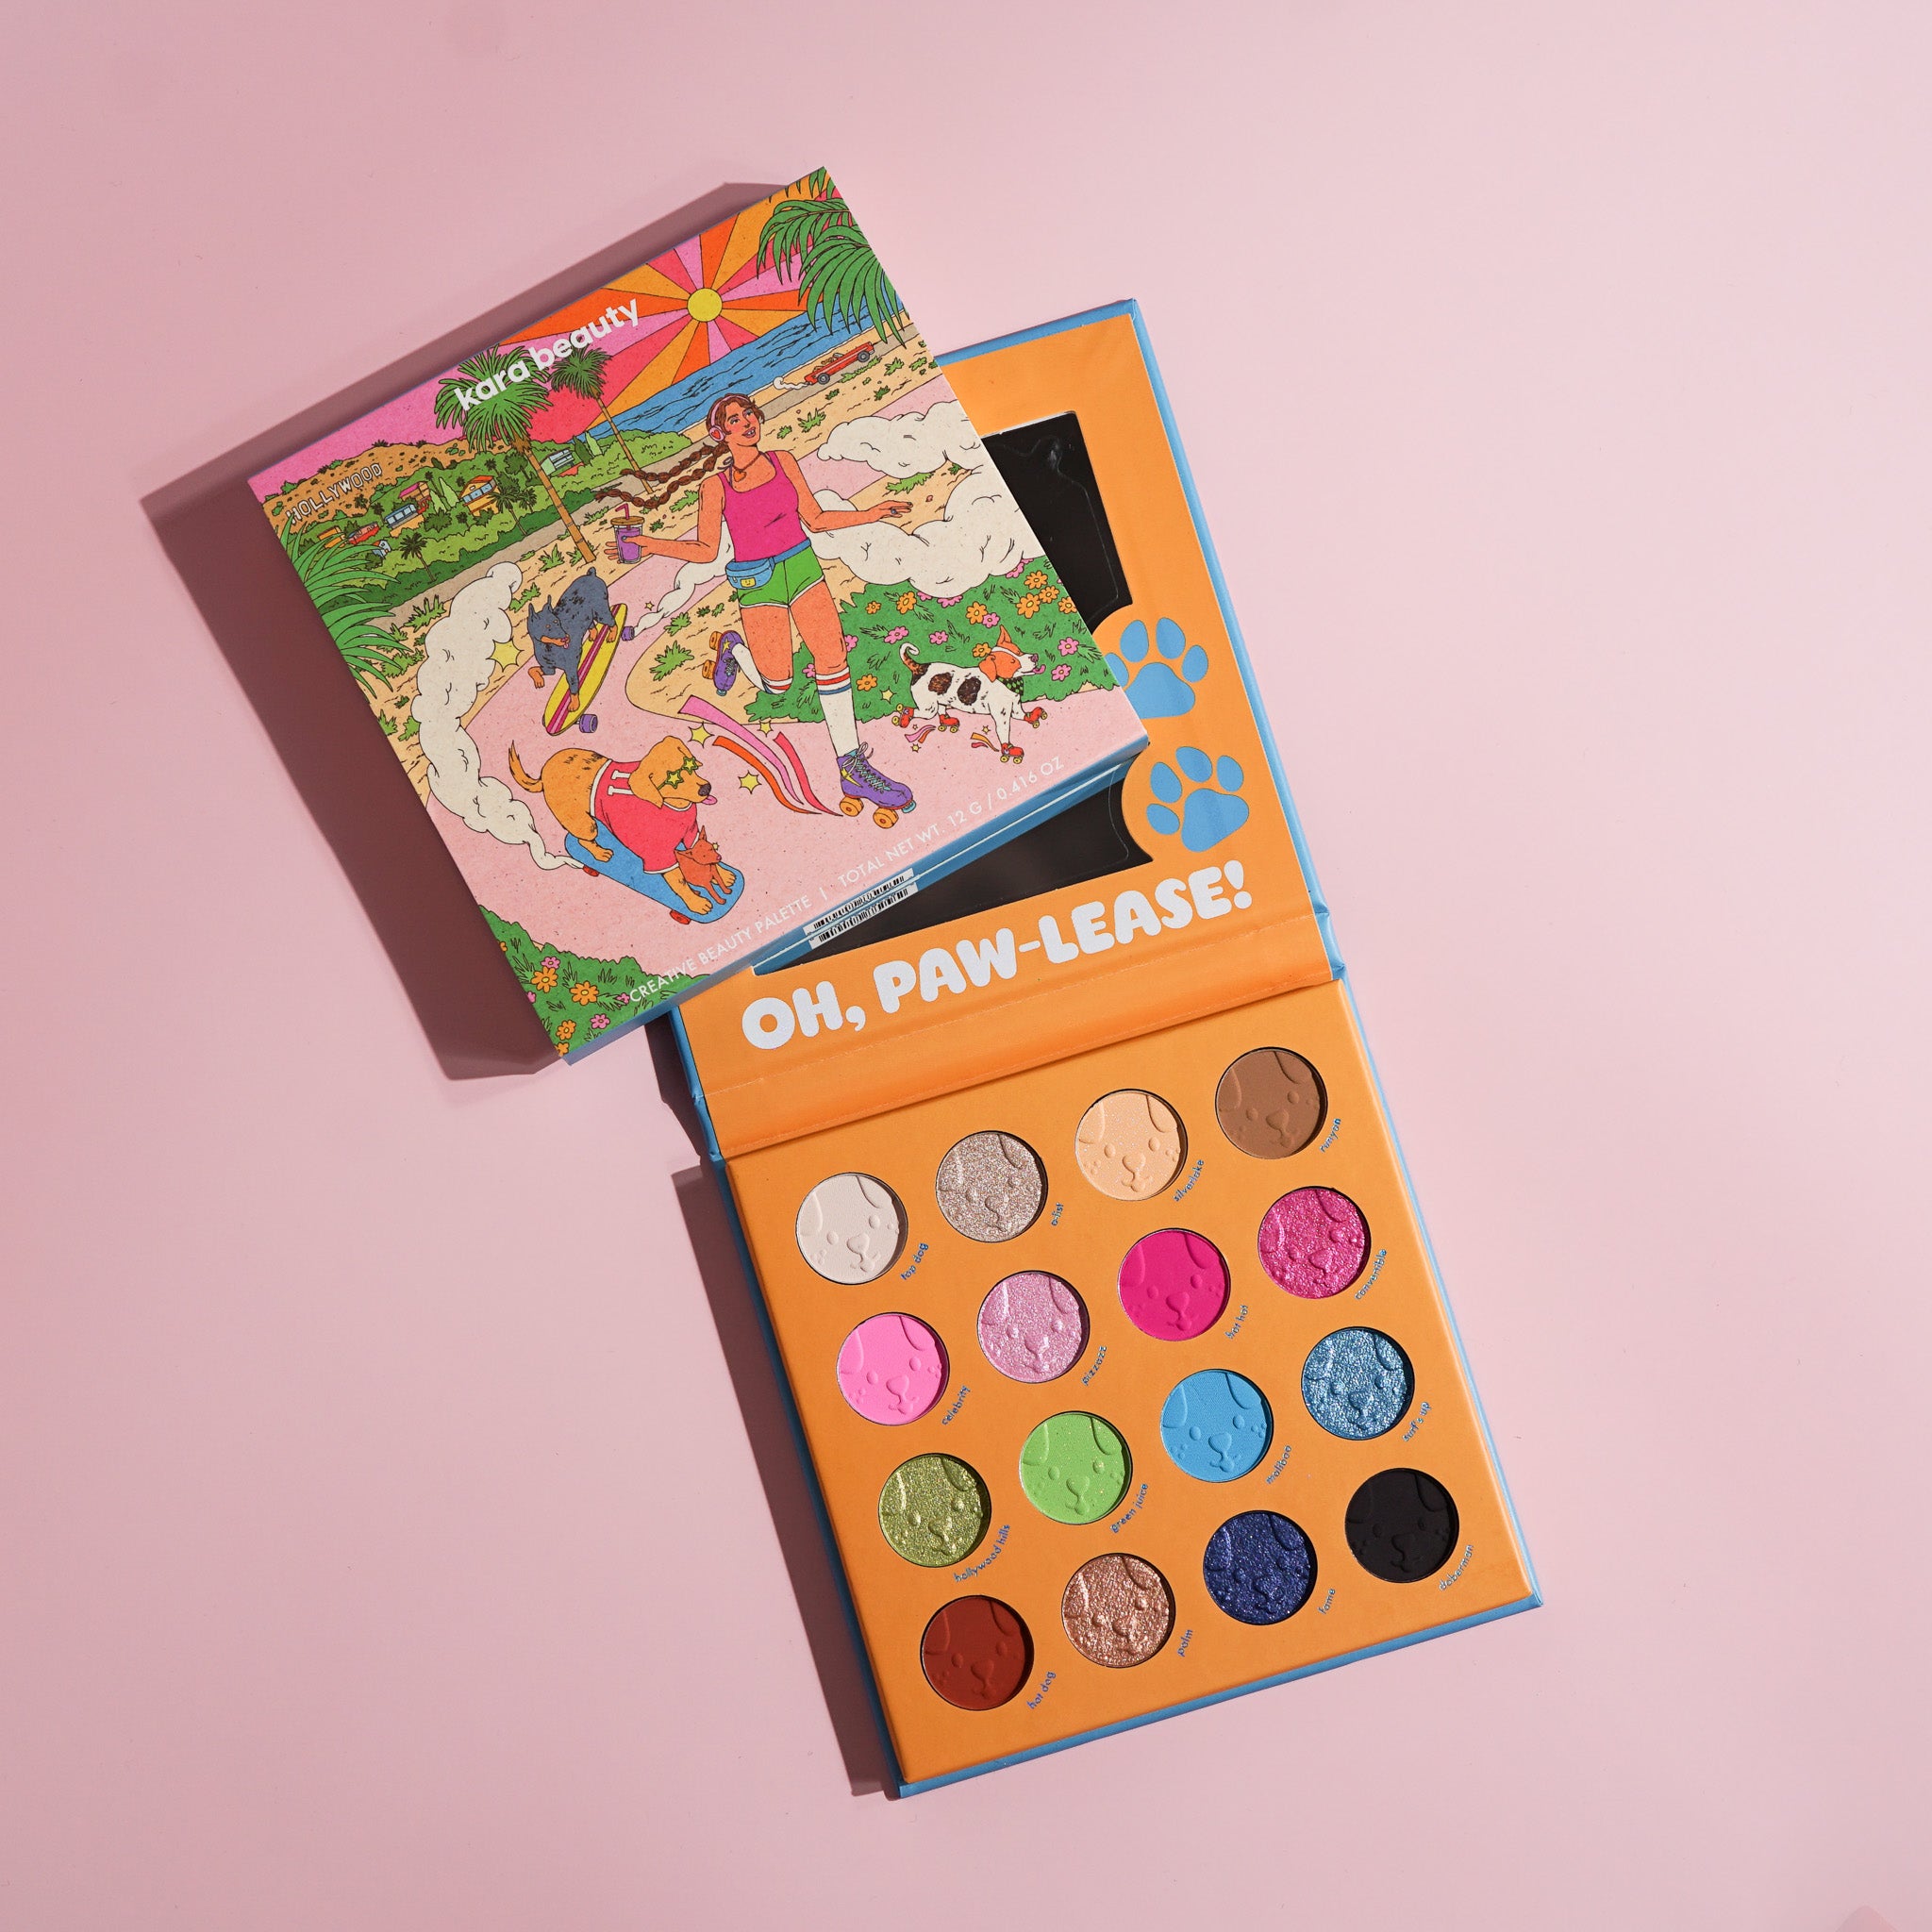 PAW'LLYWOOD FOREVER Creative Beaty Palette